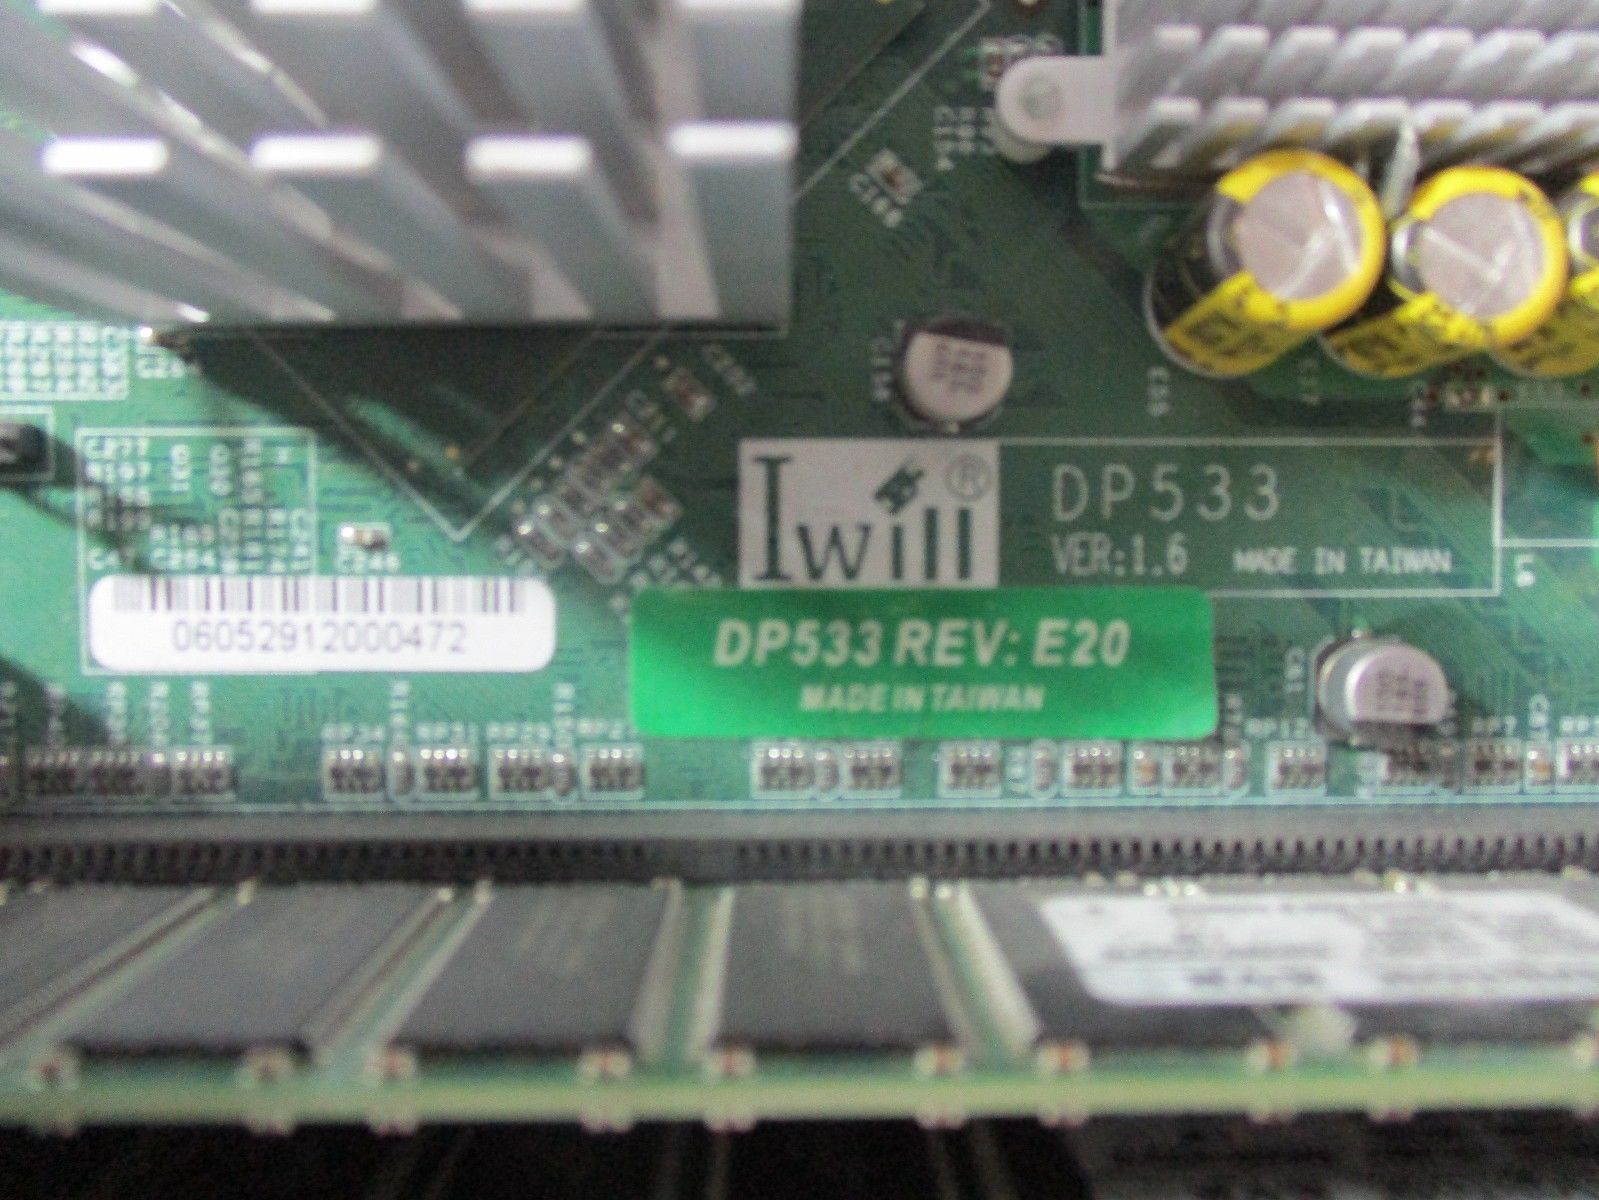 a close up of a motherboard with wires attached to it